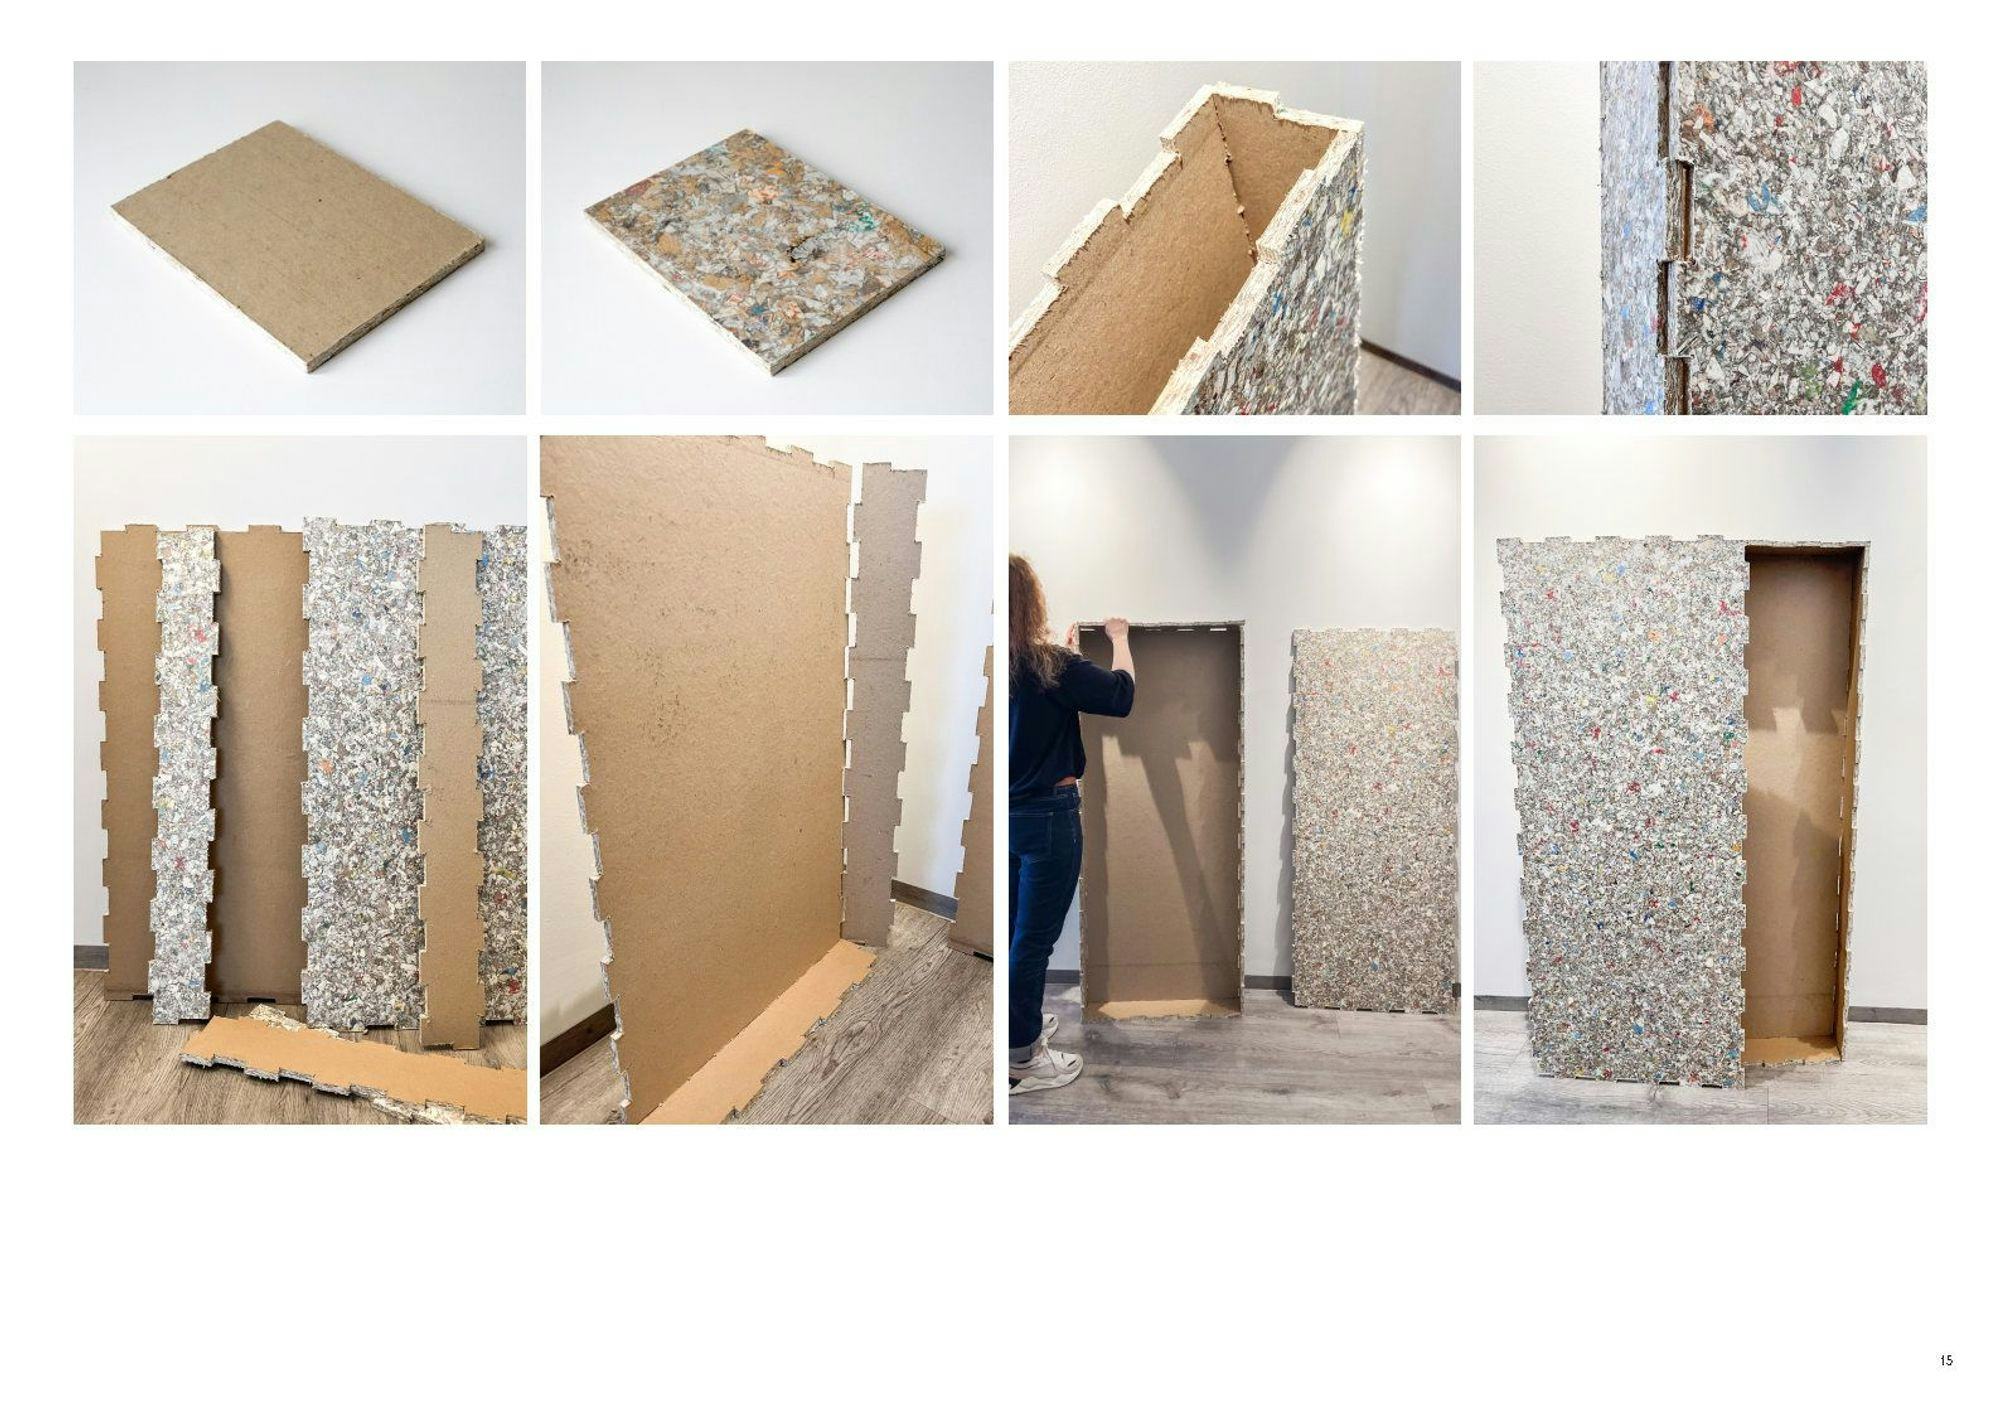 A collage of several images showcasing different stages of wall assembly or insulation